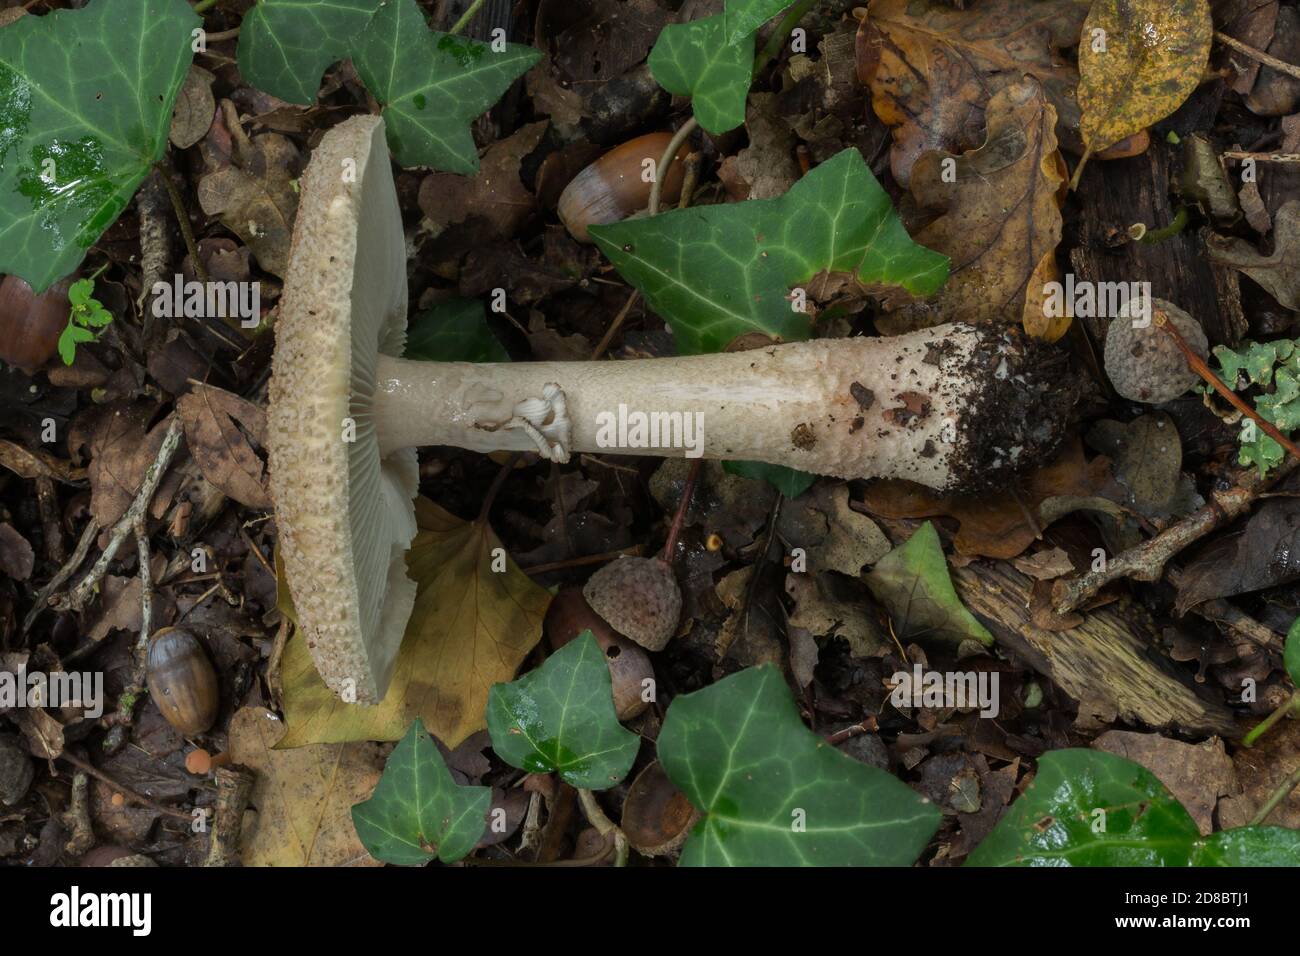 Showing the cap, stem and base of the freckled dapperling. This is a non-edible mushroom found in October woodland in France. Stock Photo